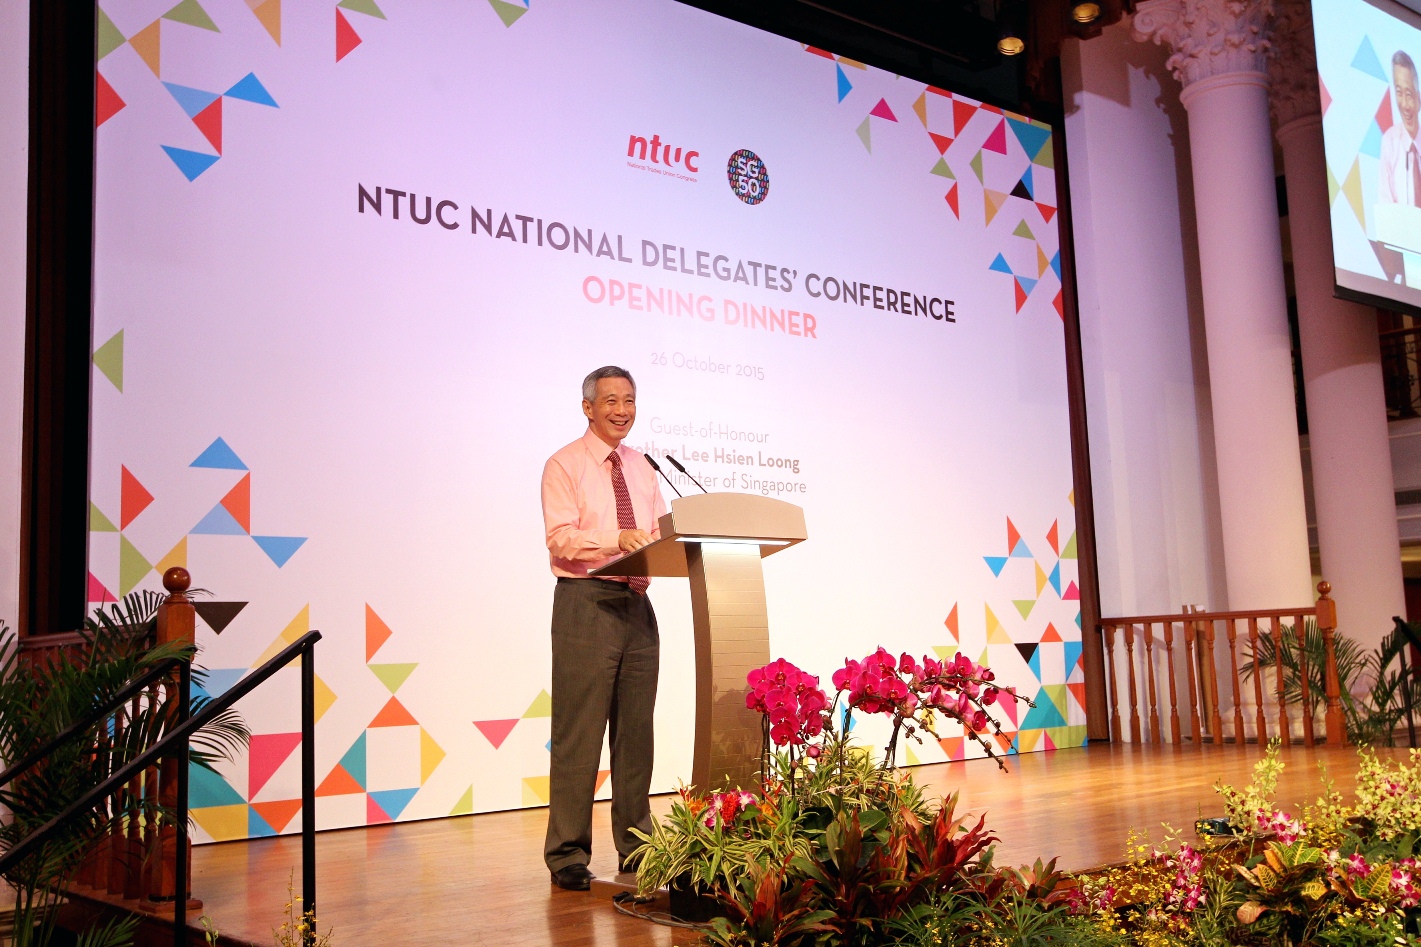 Prime Minister Lee Hsien Loong at the National Delegates Conference Opening Dinner on 26 Oct 2015 (MCI Photo by Chwee)